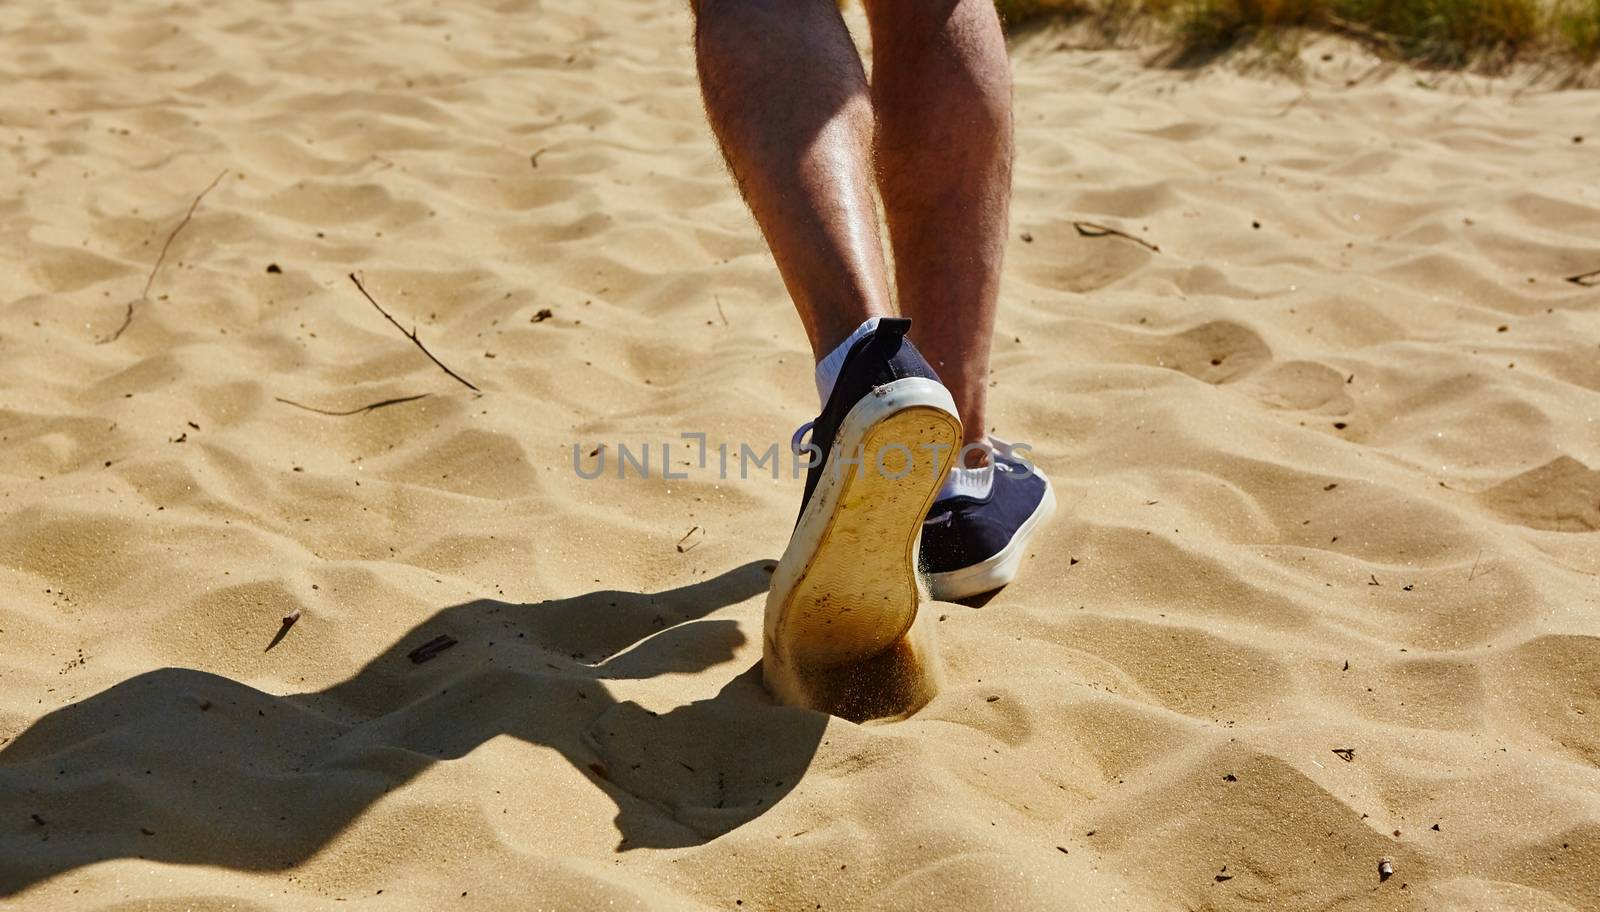 Close up fashion image of man walking alone at tropical exotic beach with blue ocean and white sand, wearing stylish sneakers.